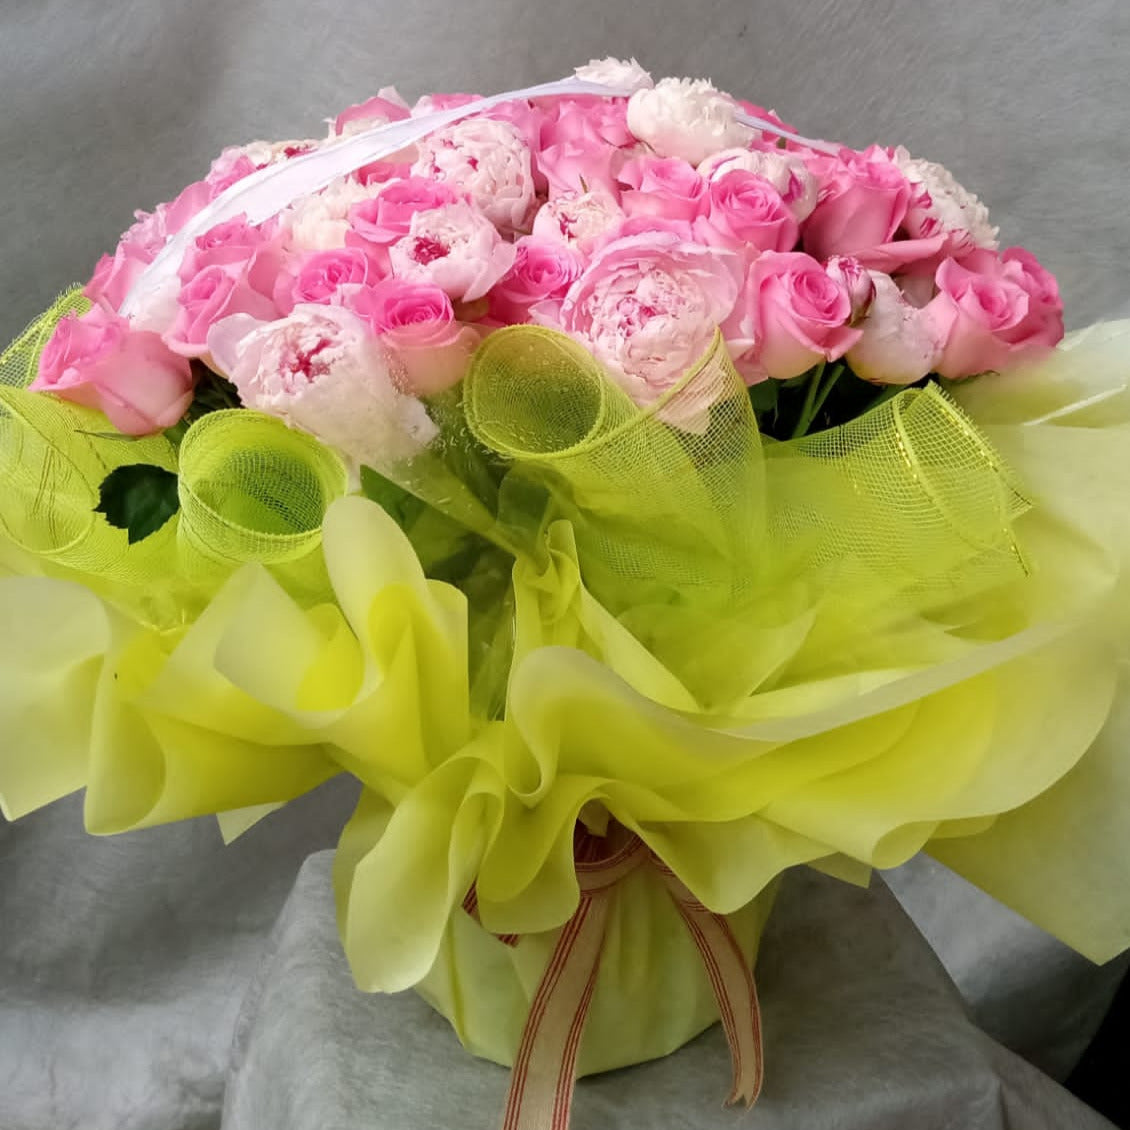 100 Roses and Peonies Bouquet